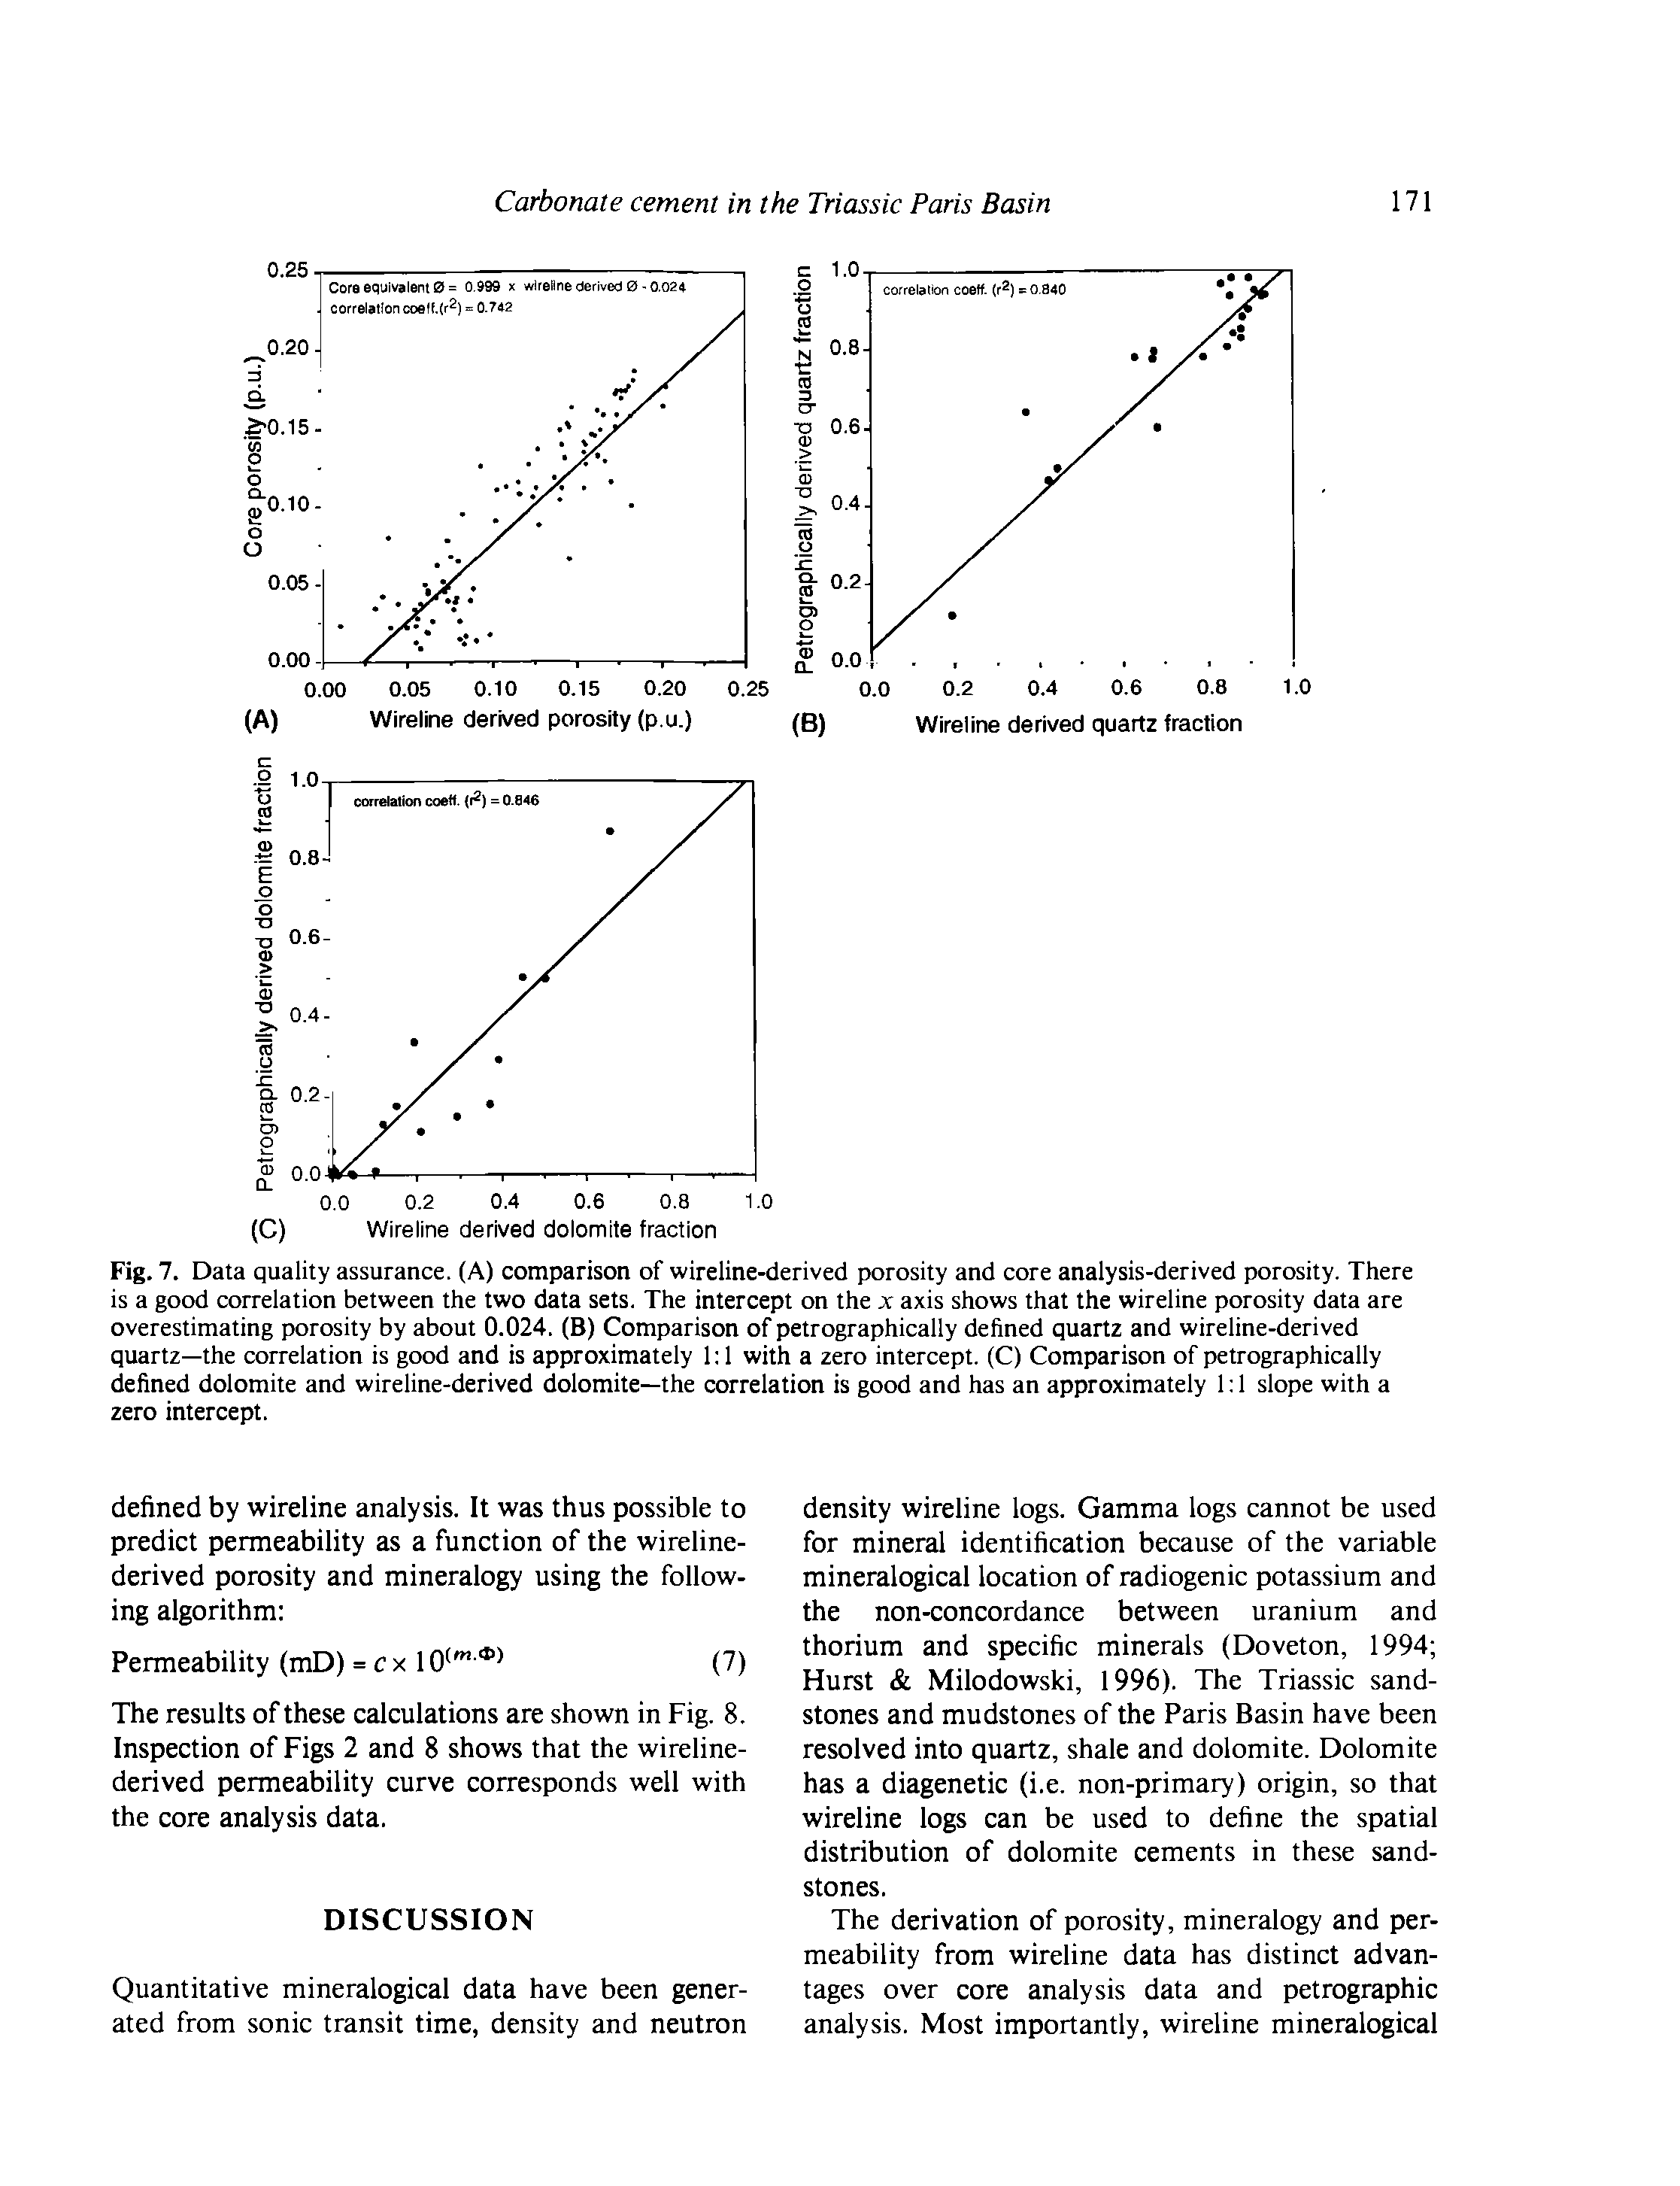 Fig. 7. Data quality assurance. (A) comparison of wireline-derived porosity and core analysis-derived porosity. There is a good correlation between the two data sets. The intercept on the x axis shows that the wireline porosity data are overestimating porosity by about 0.024. (B) Comparison of petrographically defined quartz and wireline-derived quartz—the correlation is good and is approximately 1 1 with a zero intercept. (C) Comparison of petrographically defined dolomite and wireline-derived dolomite—the correlation is good and has an approximately 1 1 slope with a zero intercept.